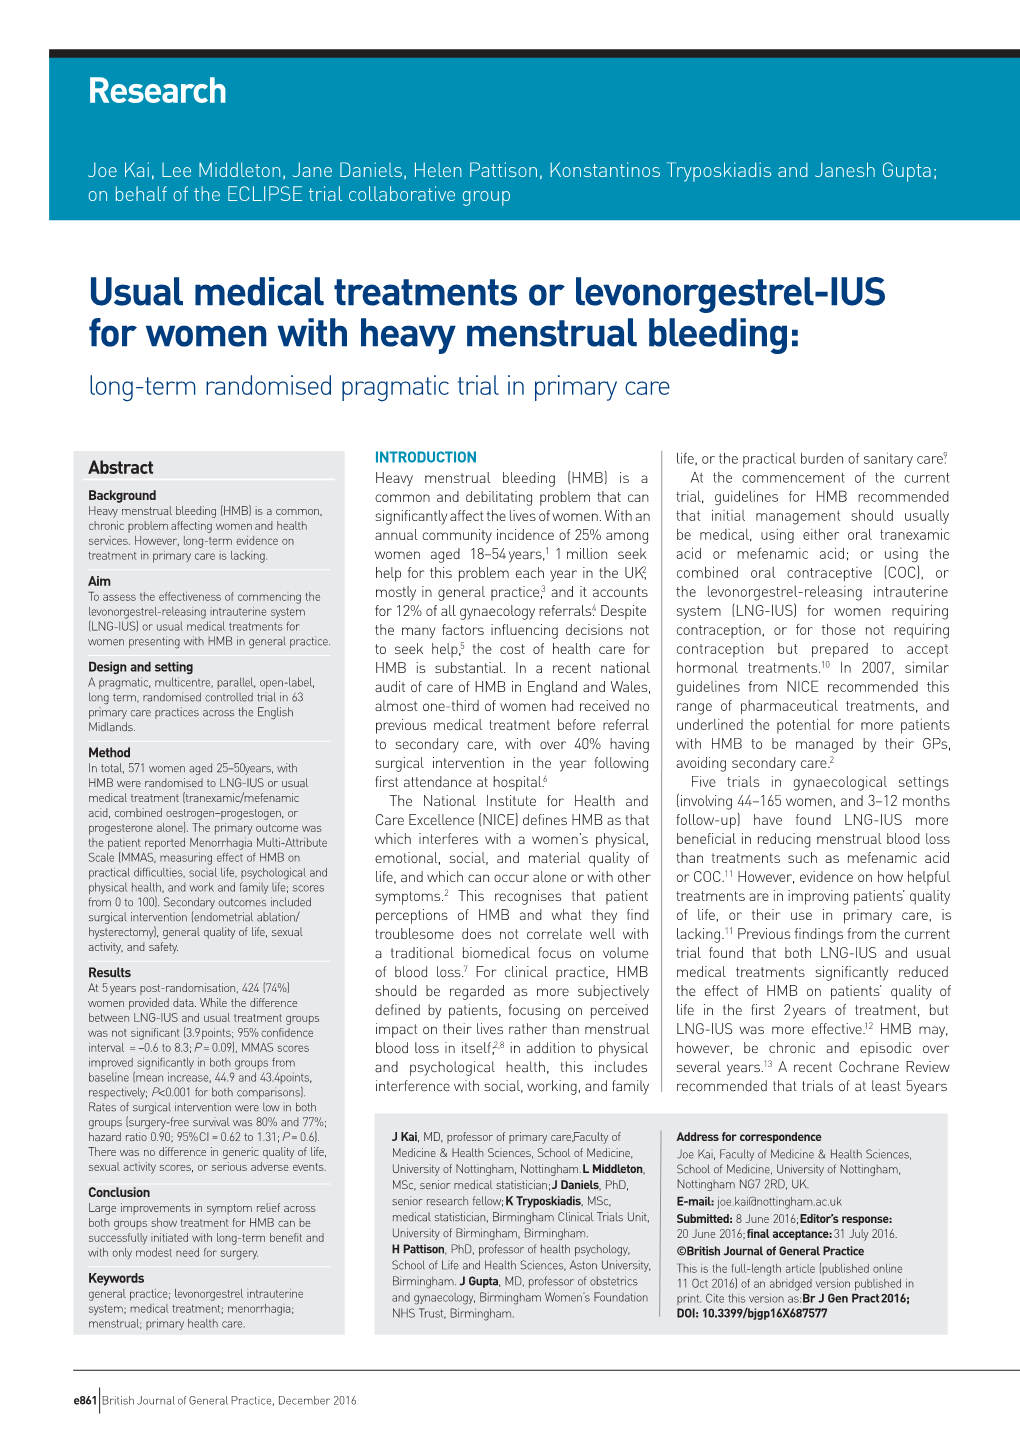 Usual Medical Treatments Or Levonorgestrel-IUS for Women with Heavy Menstrual Bleeding: Long-Term Randomised Pragmatic Trial in Primary Care